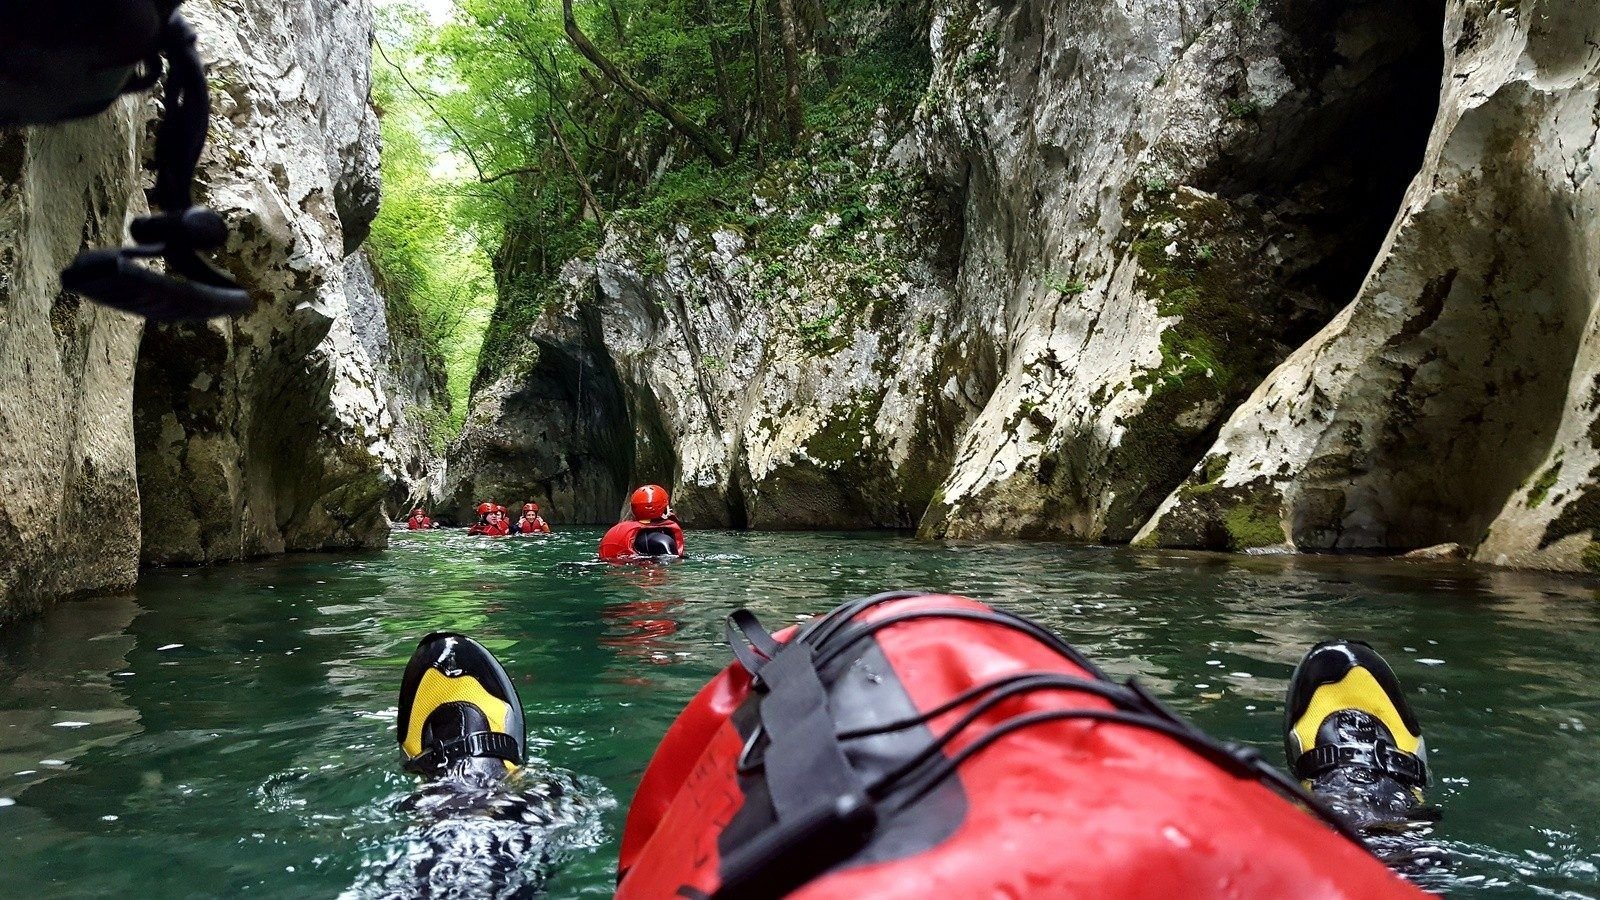 Canyoning down a river in Bosnia.